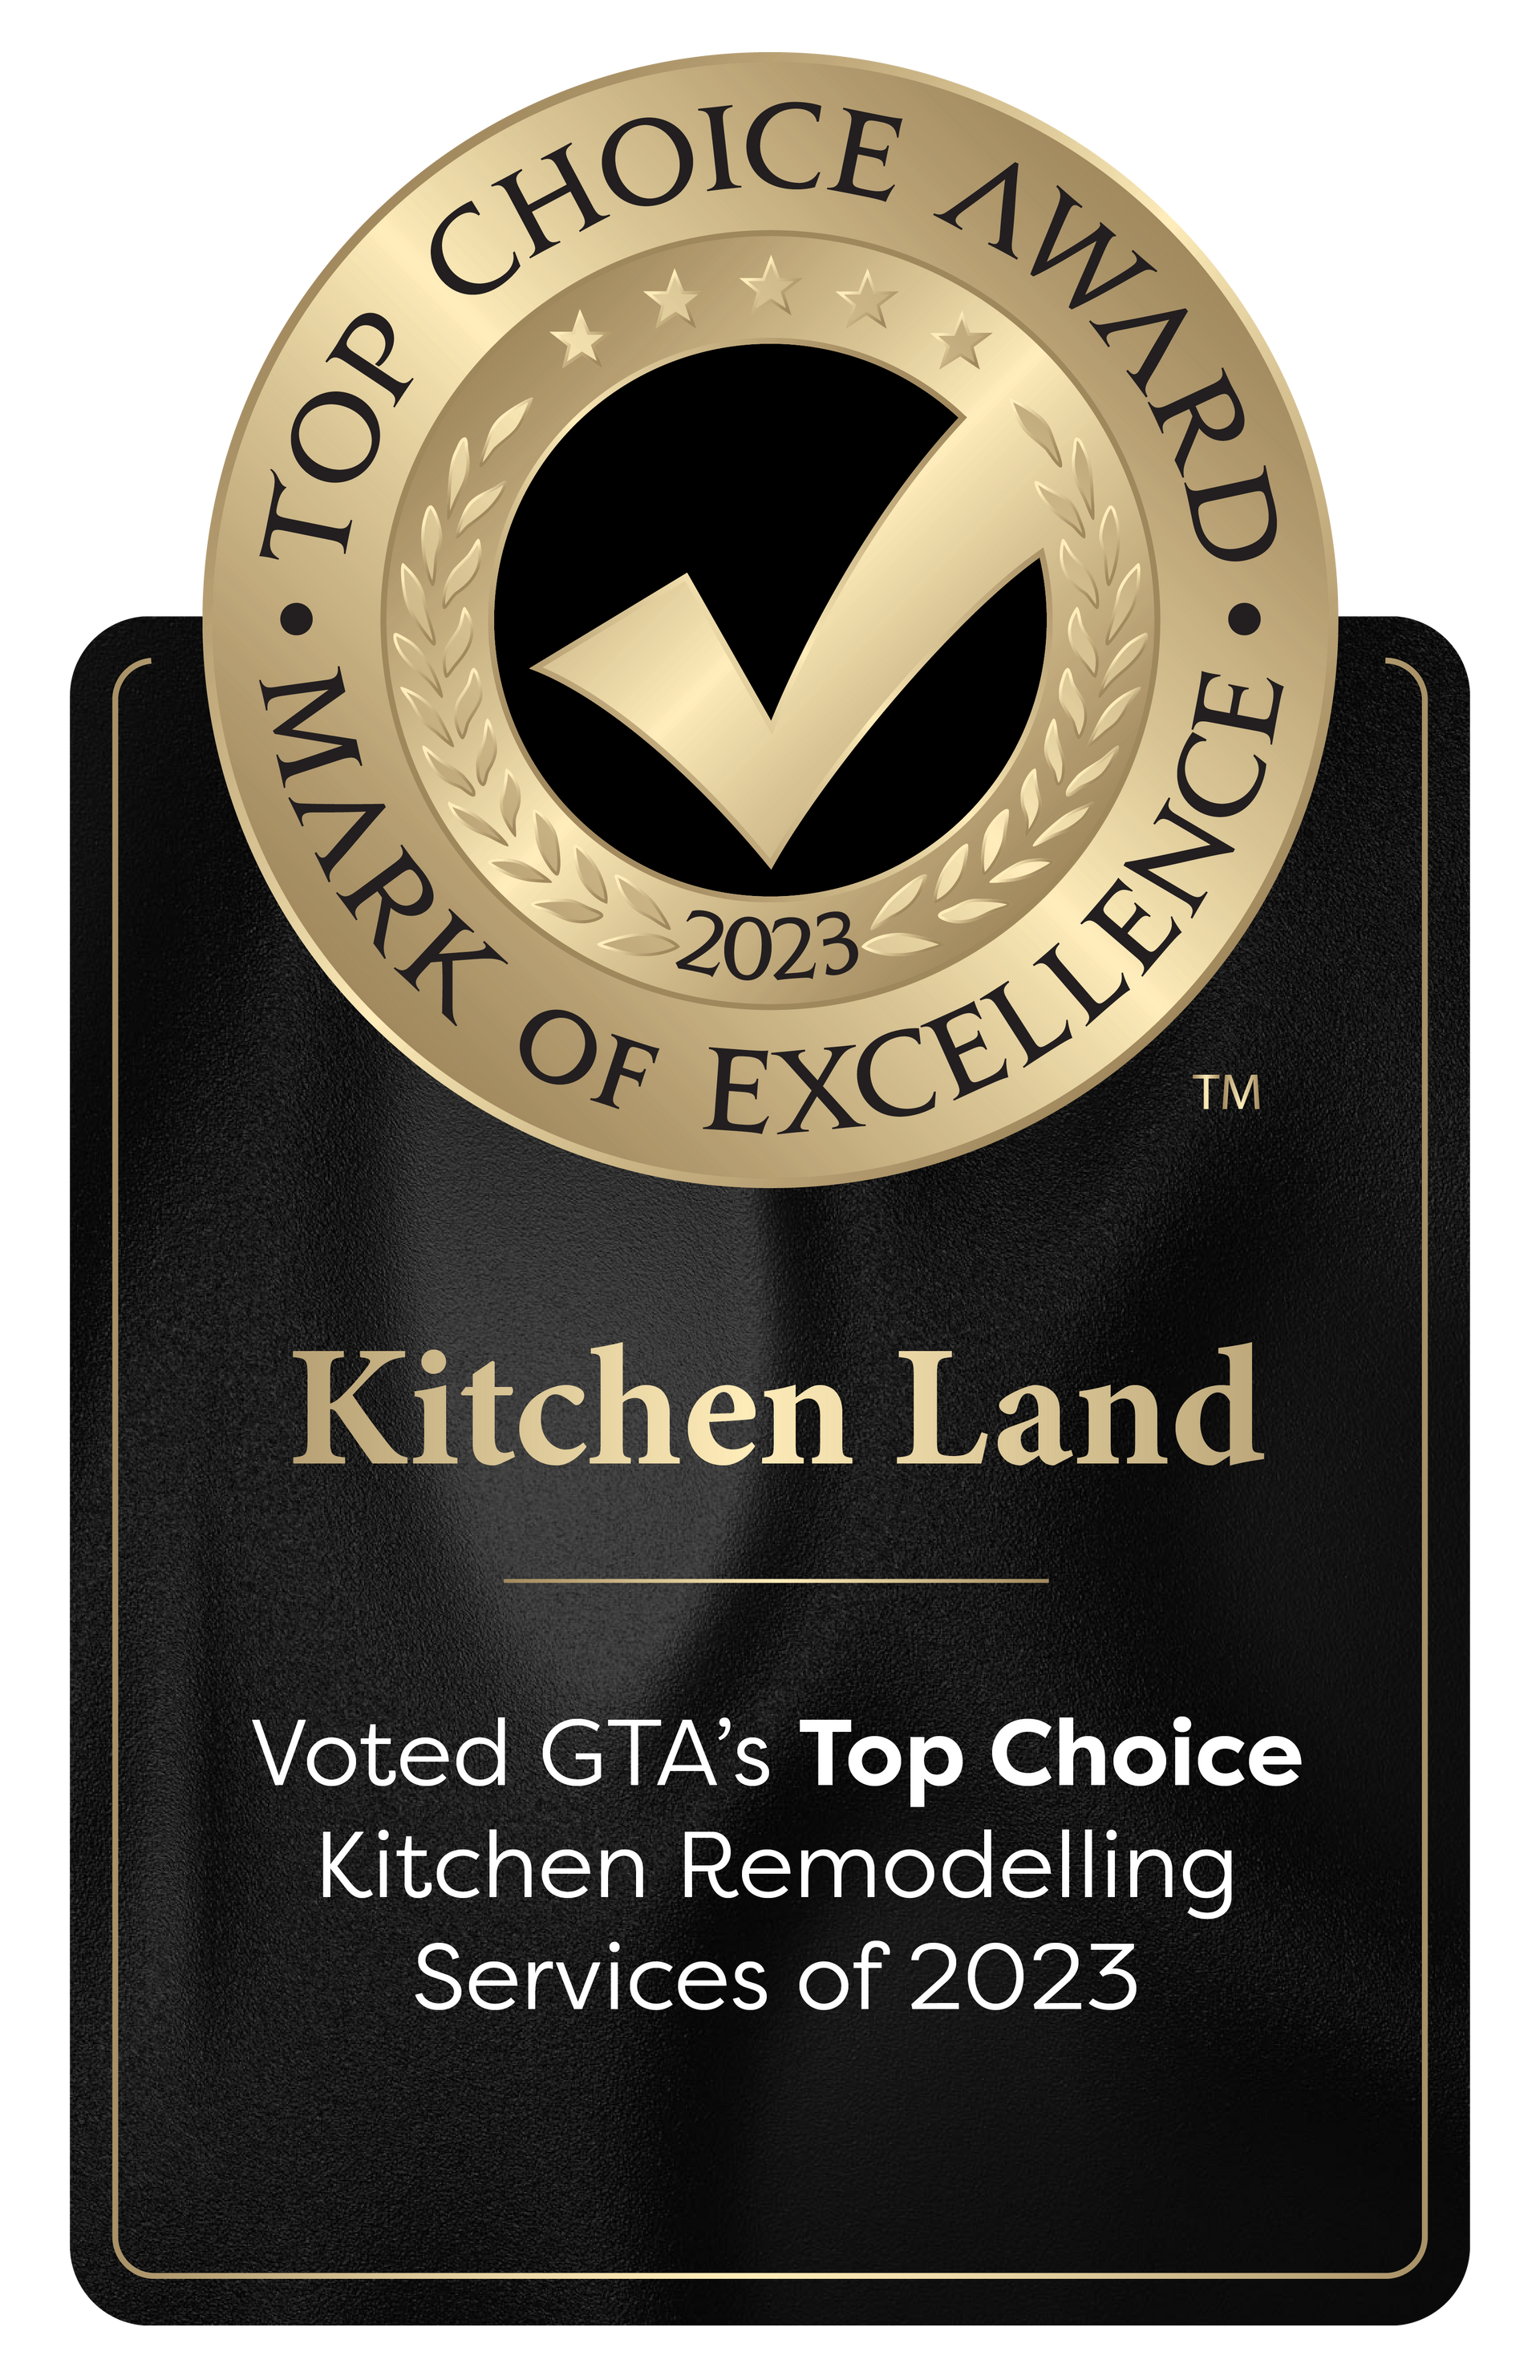 a top choice award for kitchen land voted gta 's top choice kitchen remodeling services of 2023